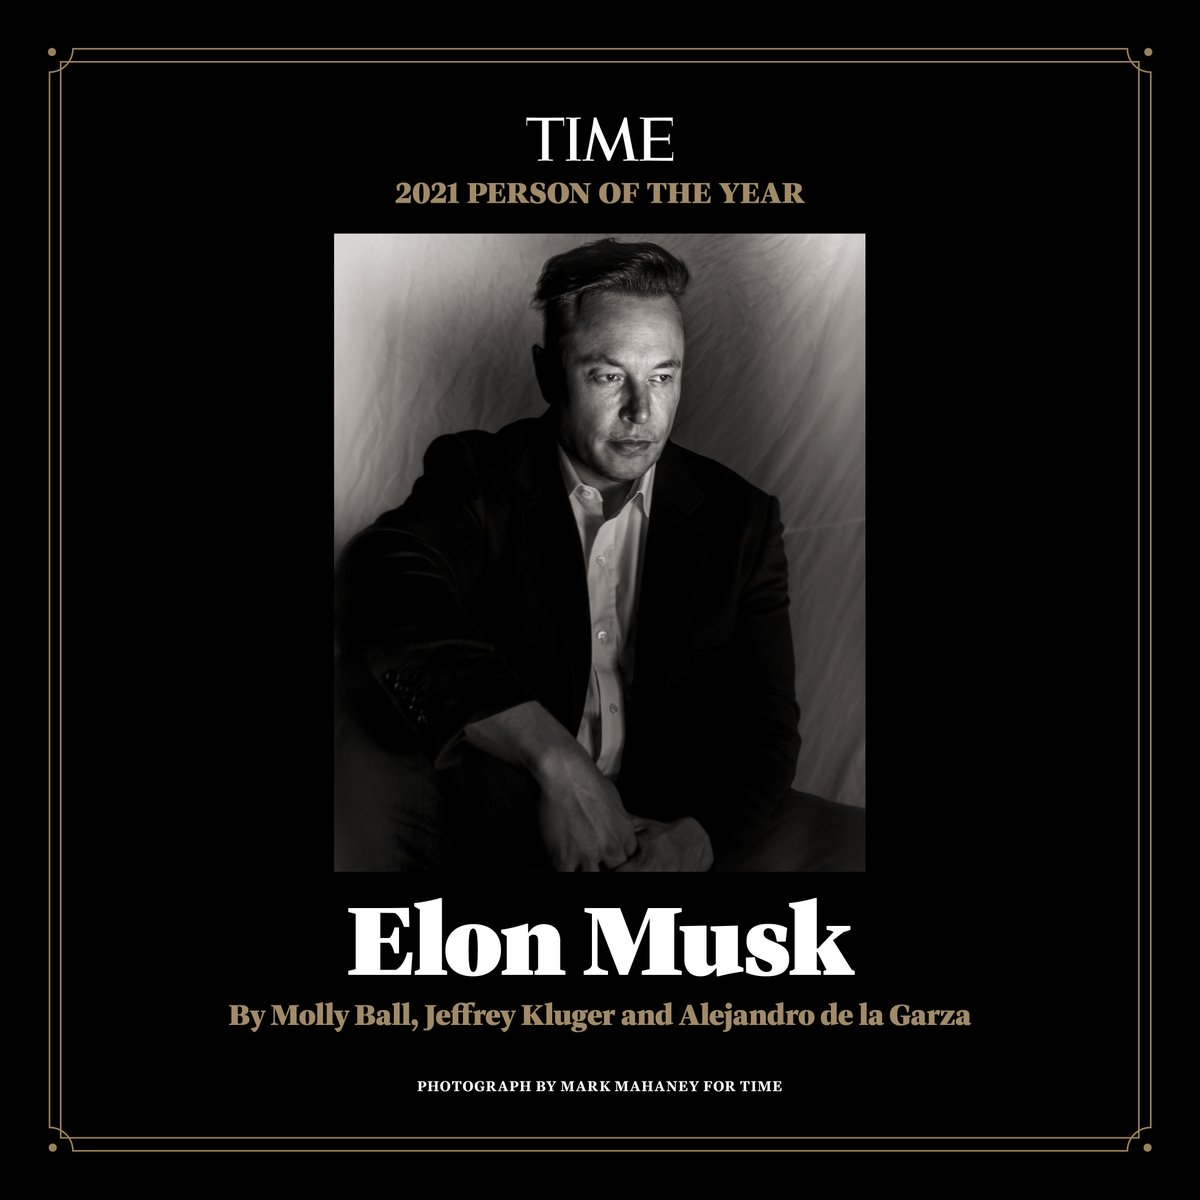 Elon Musk is TIMEs 2021 Person of the Year r/Starlink pic